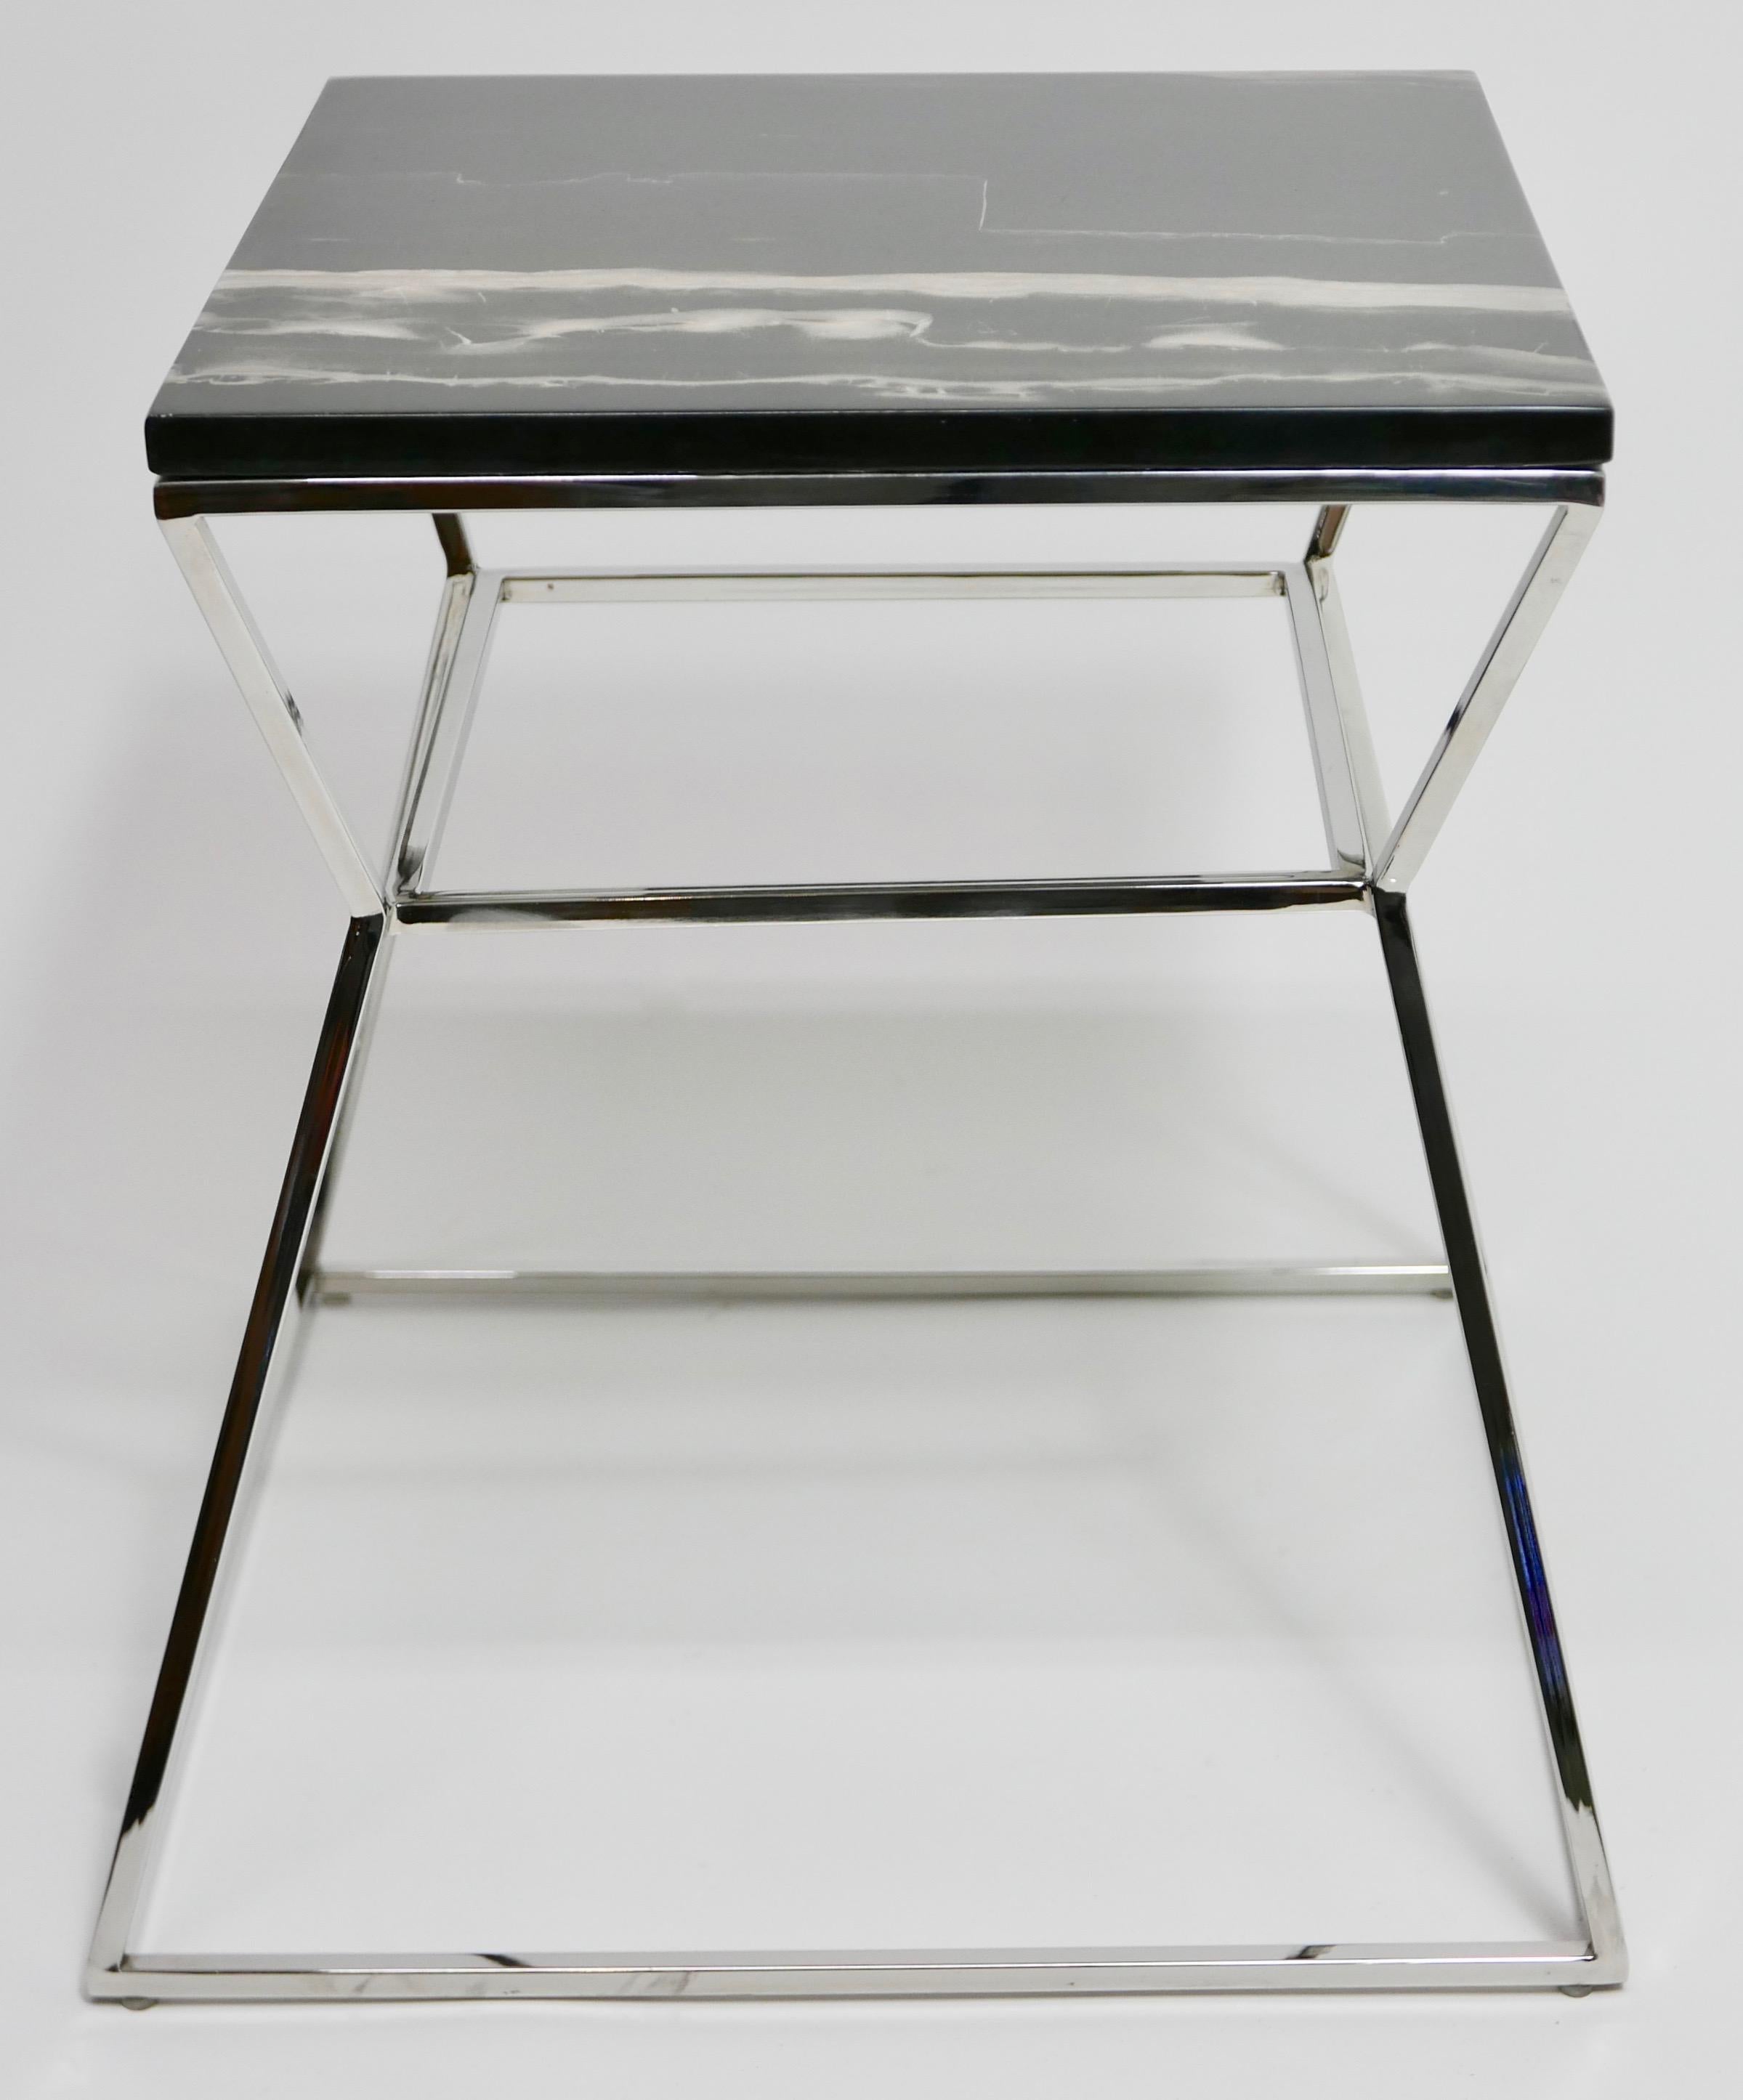 Modern black and white marble top on chrome metal angular base side or end table.
American, mid-20th century.